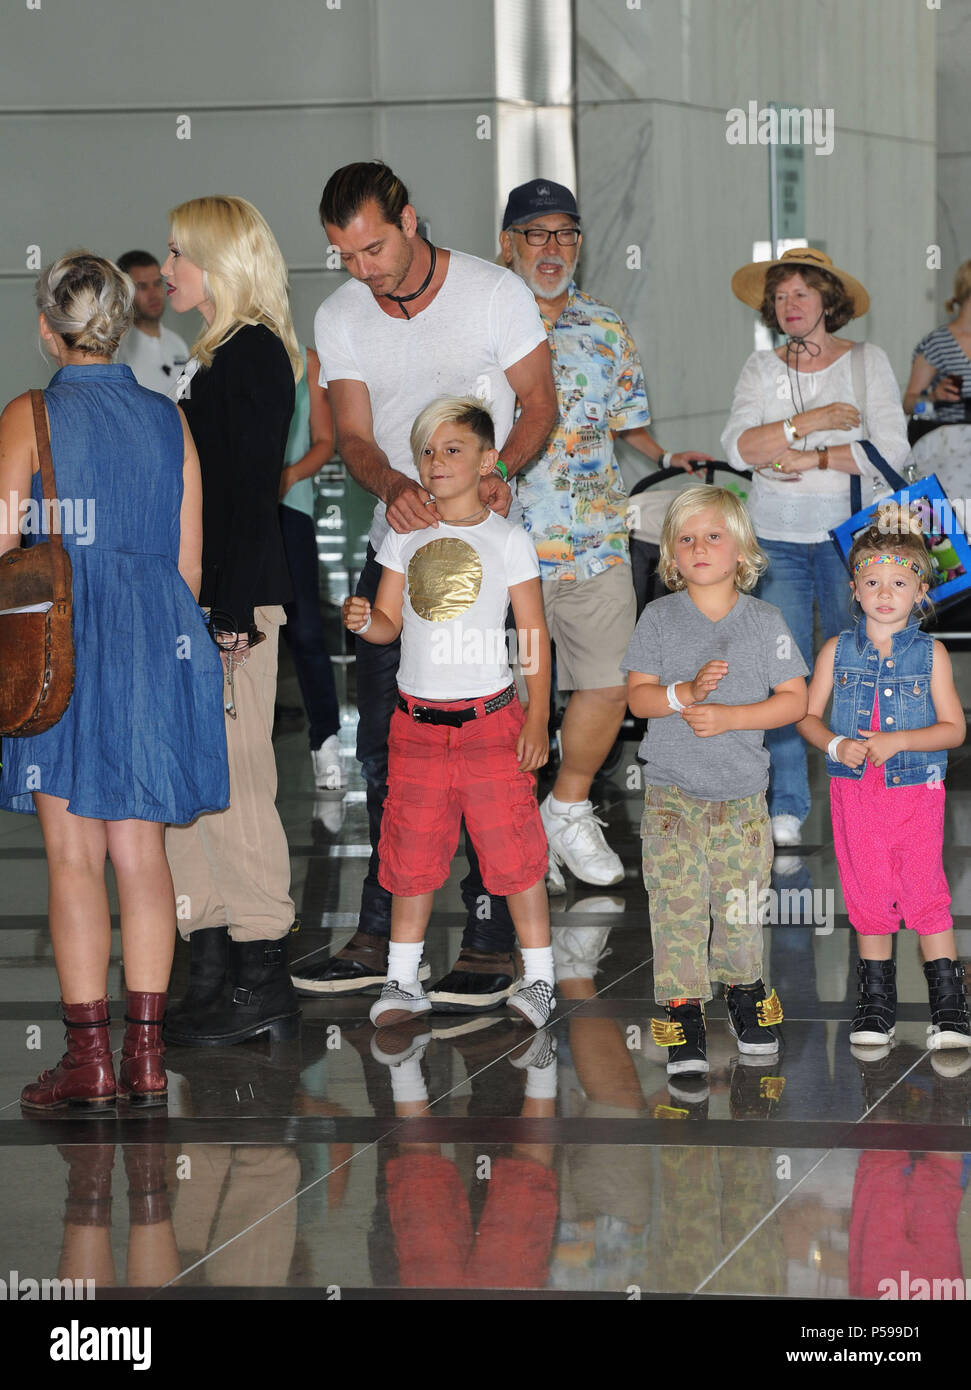 Gwen Stefani, Gavin Rossdale,  Kids Zuma, Kingston and Niece Stella Stefani  arriving the 2013 A Time For Heroes at Century Park In Los Angeles. Elizabeth Glaser Pedriatic Aids Foundation Gwen Stefani, Gavin Rossdale,  Kids Zuma, Kingston and Niece Stella Stefani 110 ------------- Red Carpet Event, Vertical, USA, Film Industry, Celebrities,  Photography, Bestof, Arts Culture and Entertainment, Topix Celebrities fashion /  Vertical, Best of, Event in Hollywood Life - California,  Red Carpet and backstage, USA, Film Industry, Celebrities,  movie celebrities, TV celebrities, Music celebrities, Ph Stock Photo